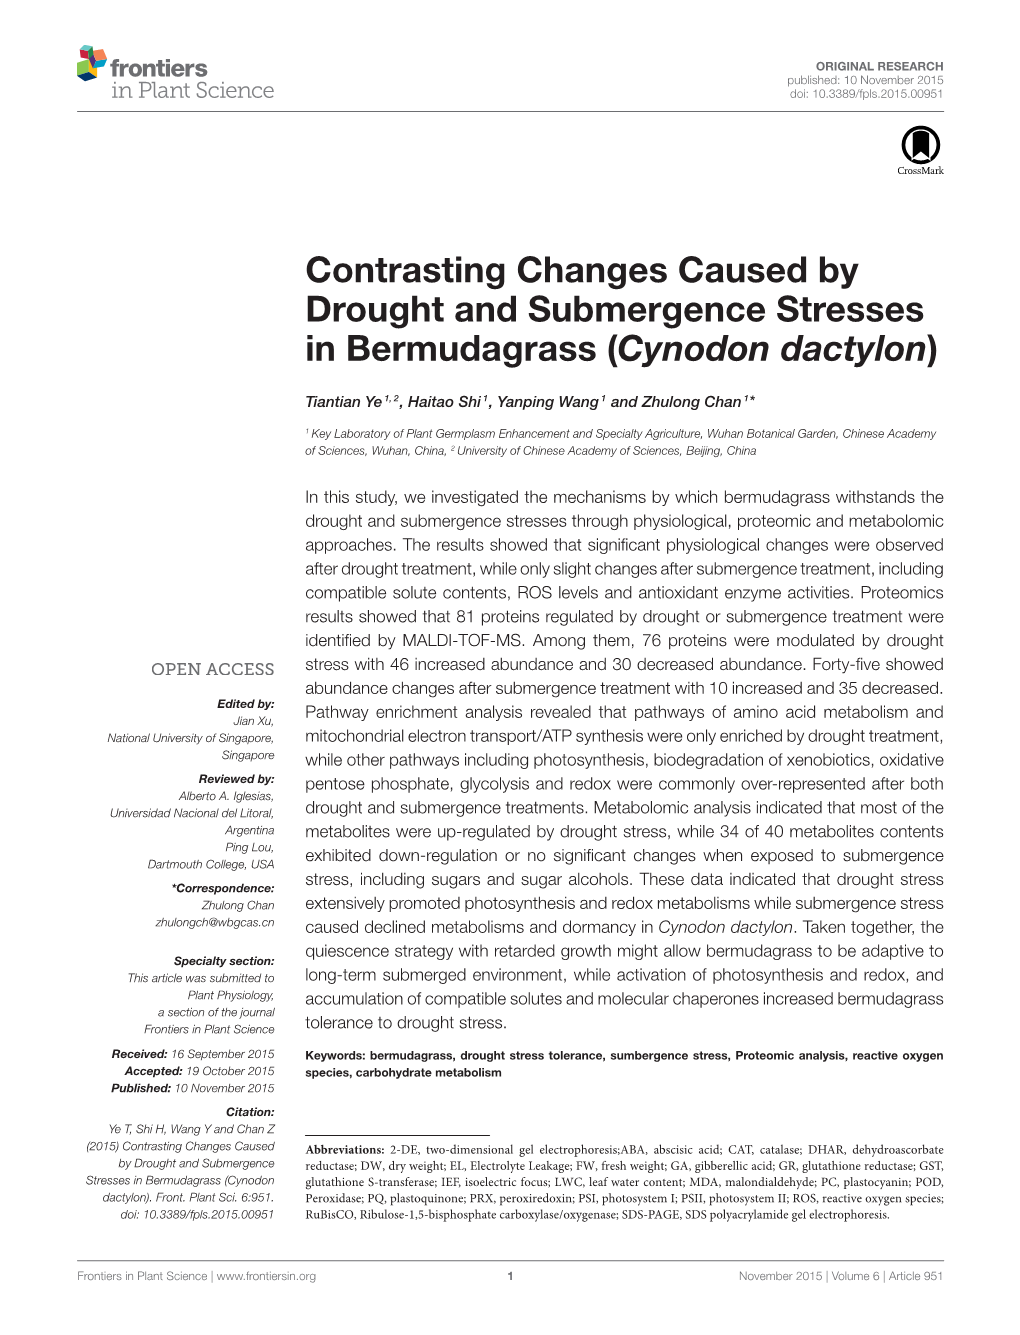 Contrasting Changes Caused by Drought and Submergence Stresses in Bermudagrass (Cynodon Dactylon)